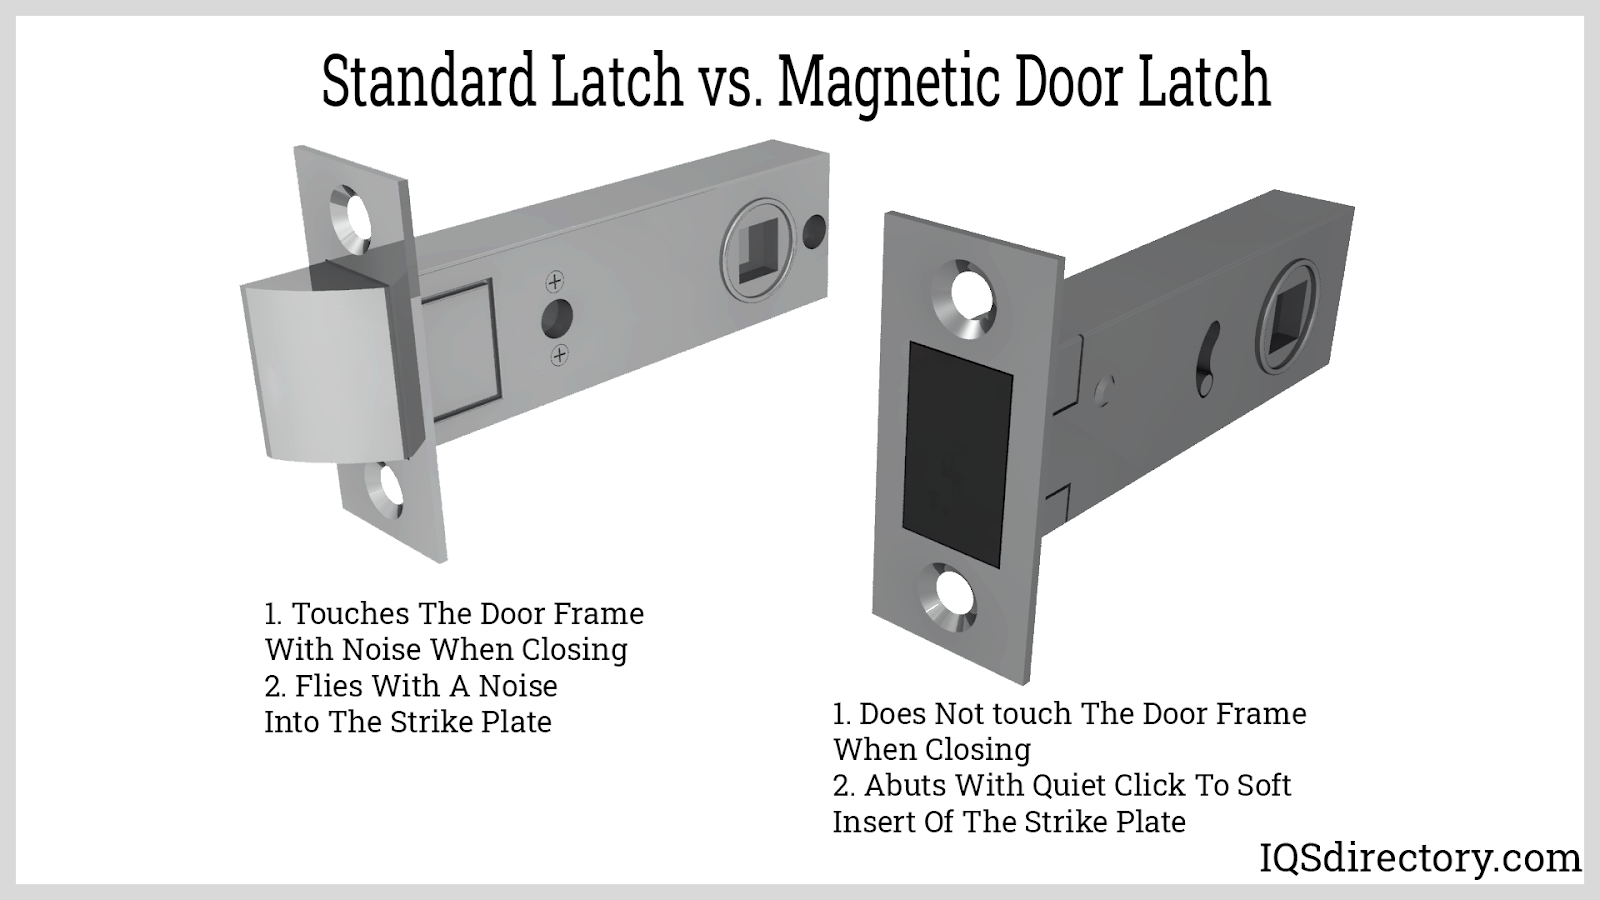 Magnetic Door Latches: Types, Uses, Features and Benefits